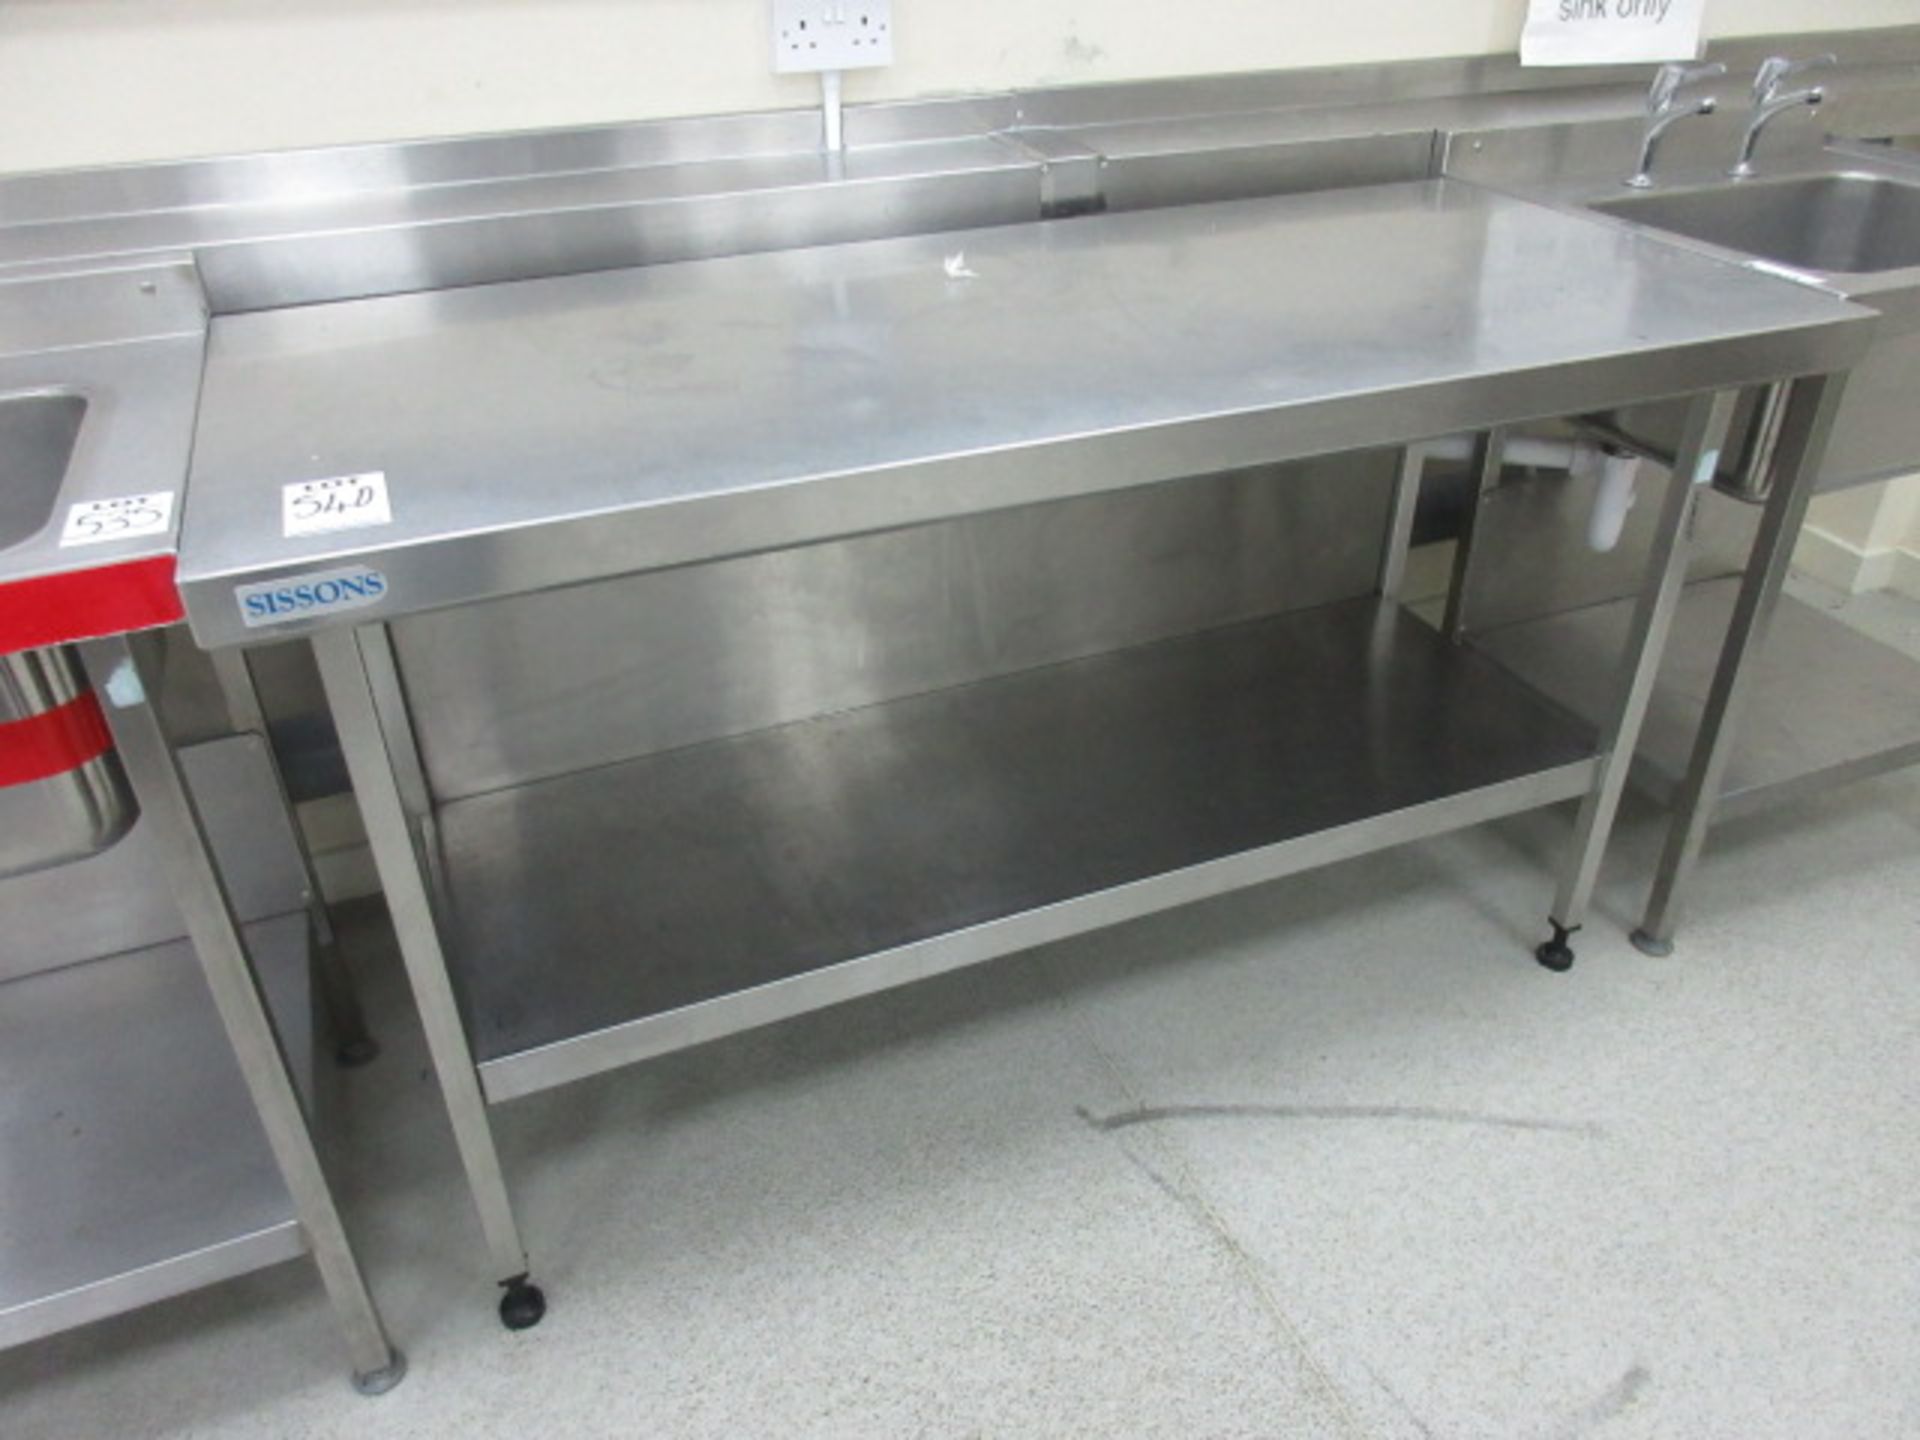 Sissons Stainless Steel Catering Table. Size 1500 mm x 650 mm Holehouse Road Grd Floor Room B3